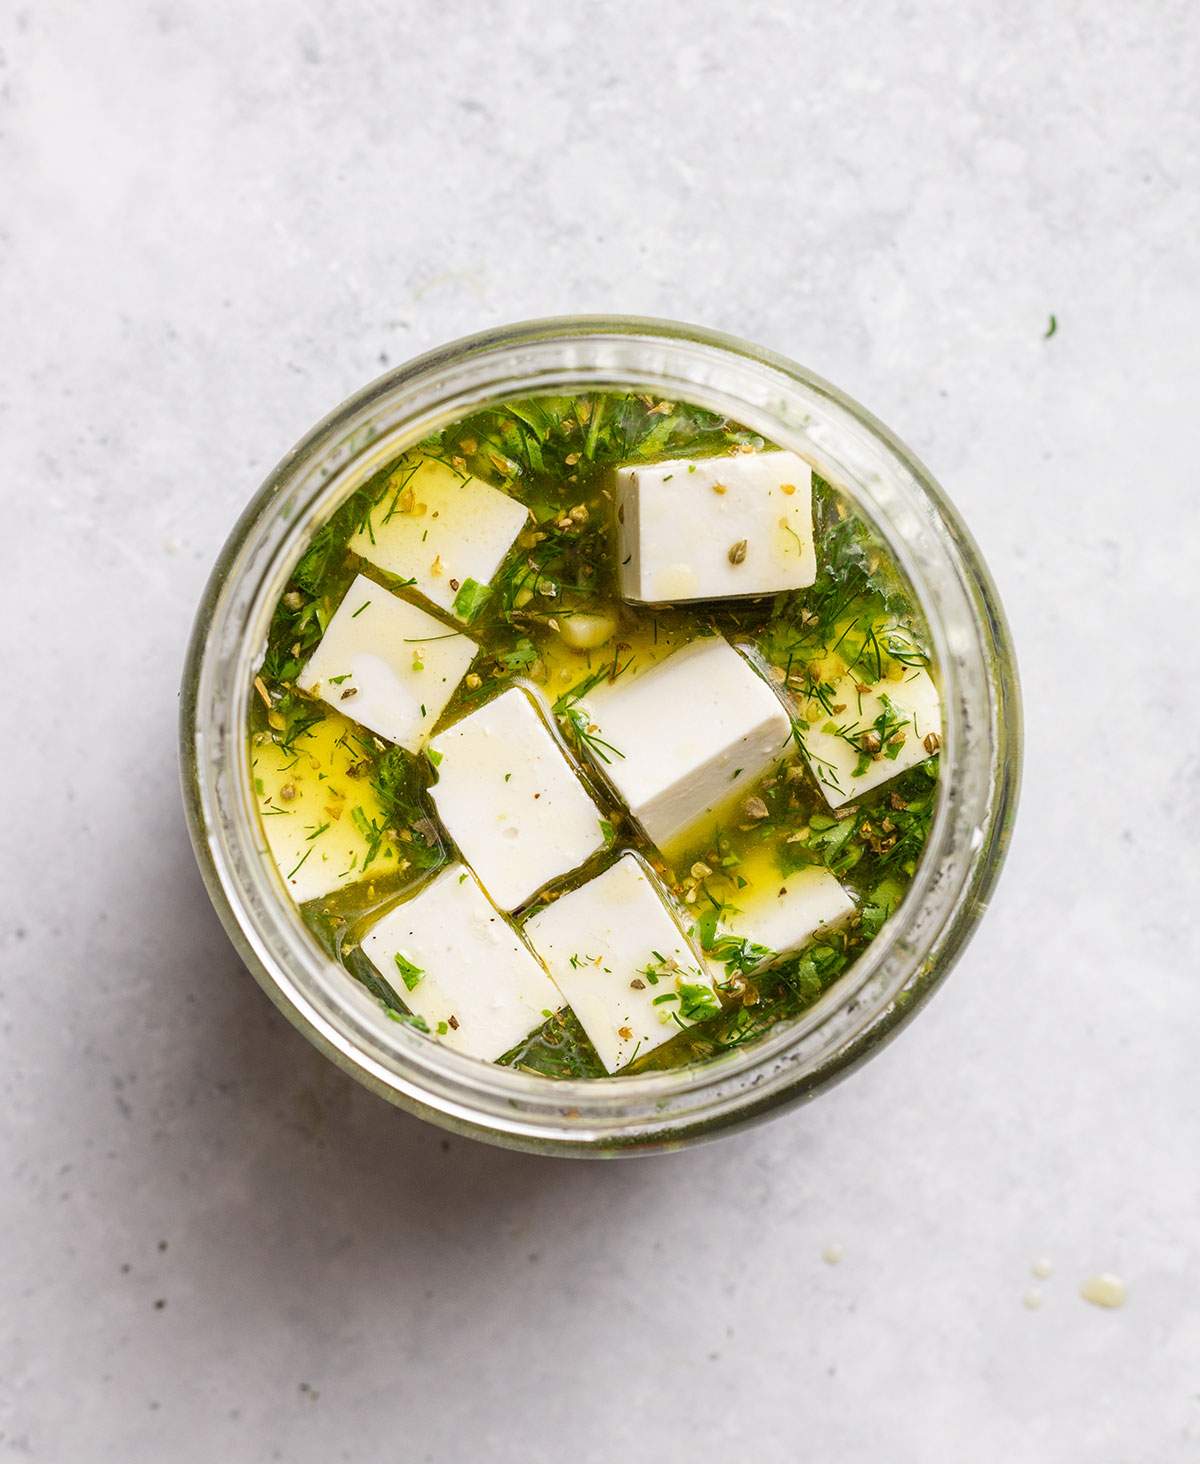 Vegan feta cubes are sitting in a oily and herby marinade in a glass jar.